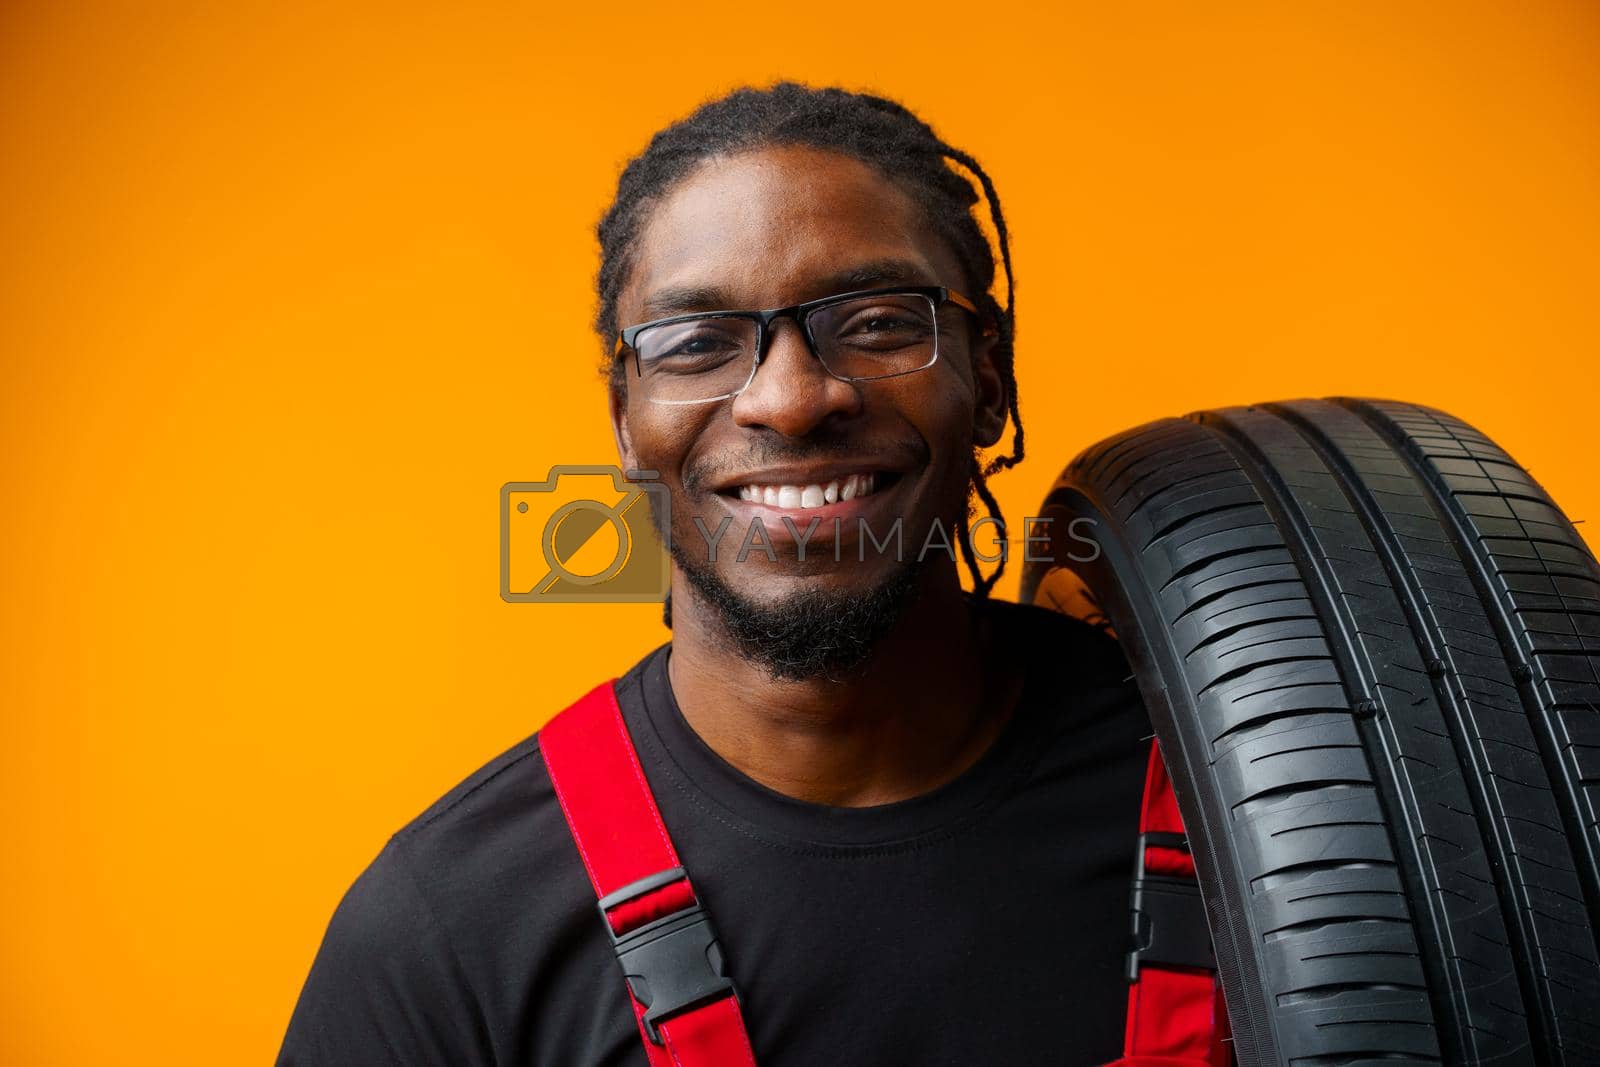 Royalty free image of African american car service worker with car tyre against yellow background by Fabrikasimf